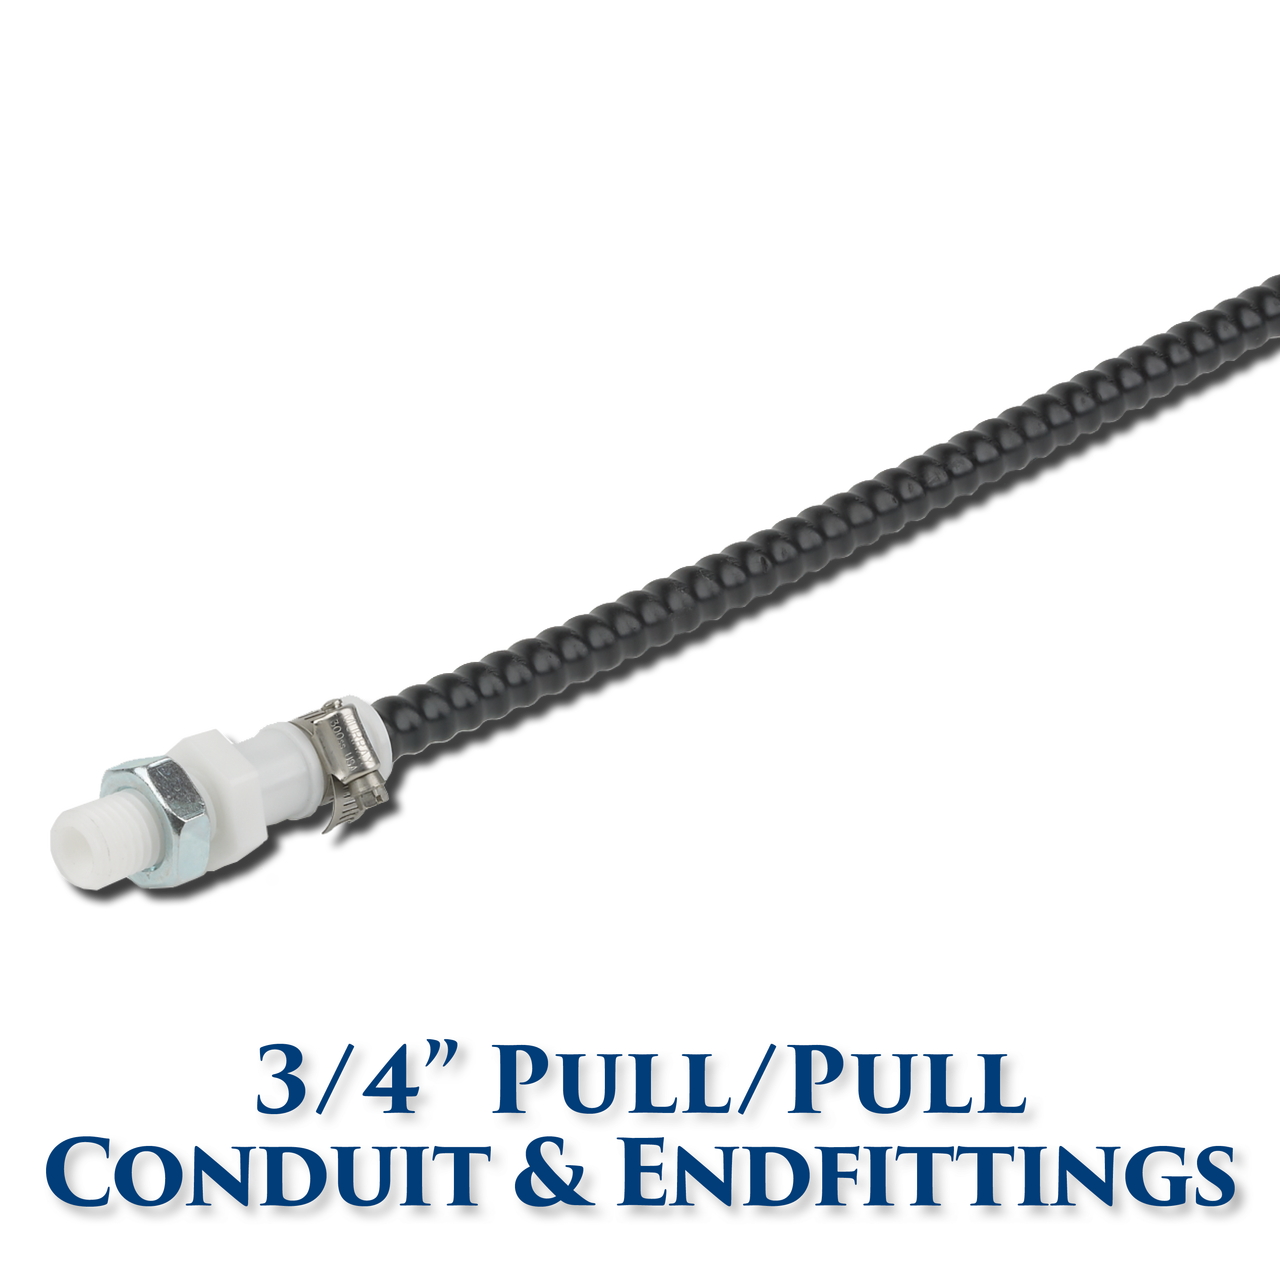 Edson Marine: 6 foot length - 3/4 Pull/Pull Conduit for 3/16 and